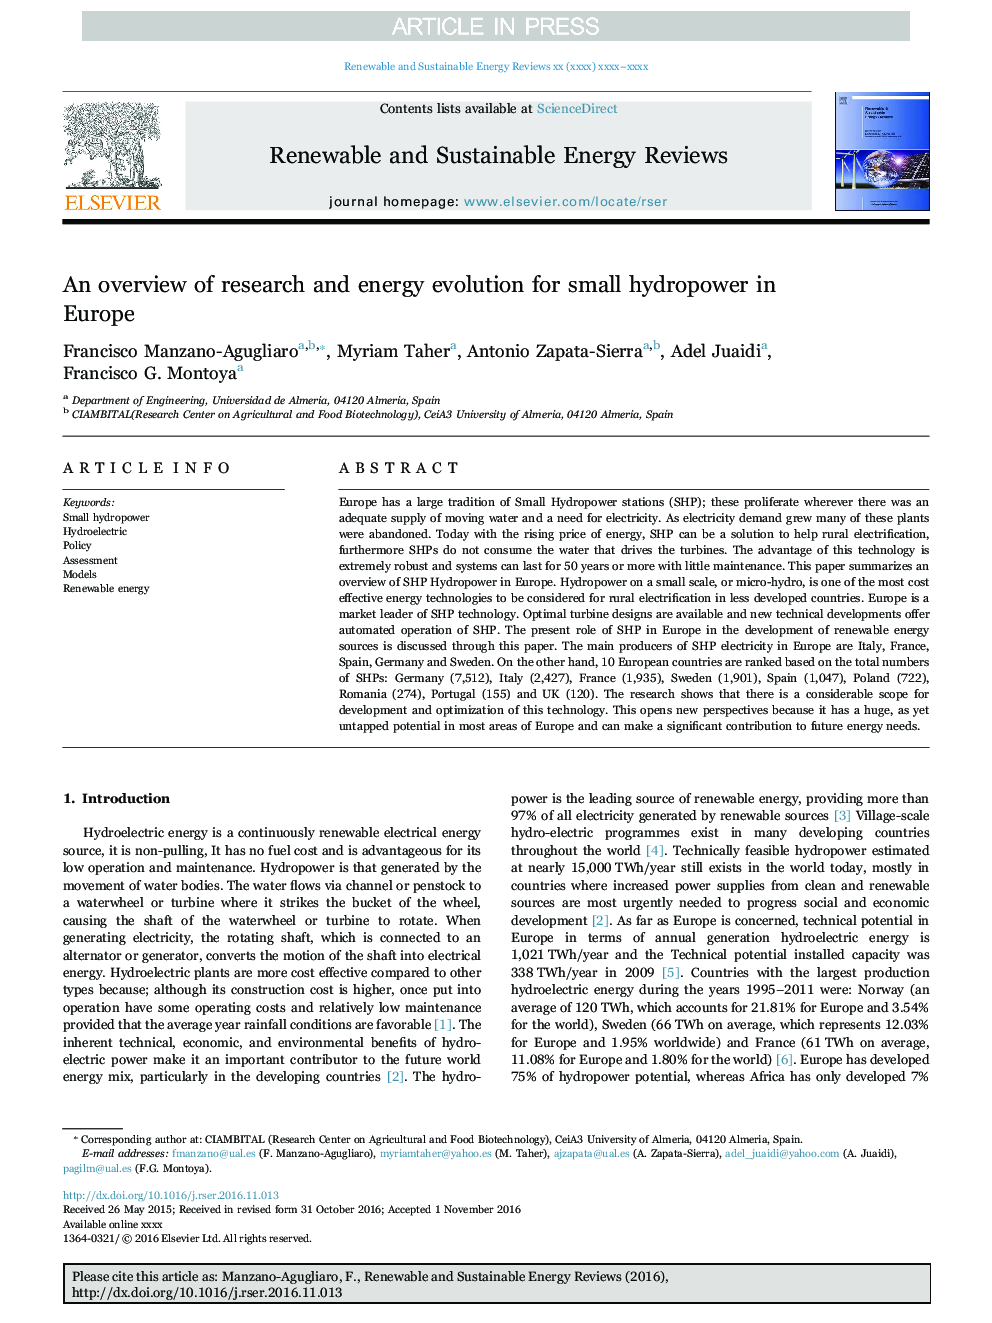 An overview of research and energy evolution for small hydropower in Europe